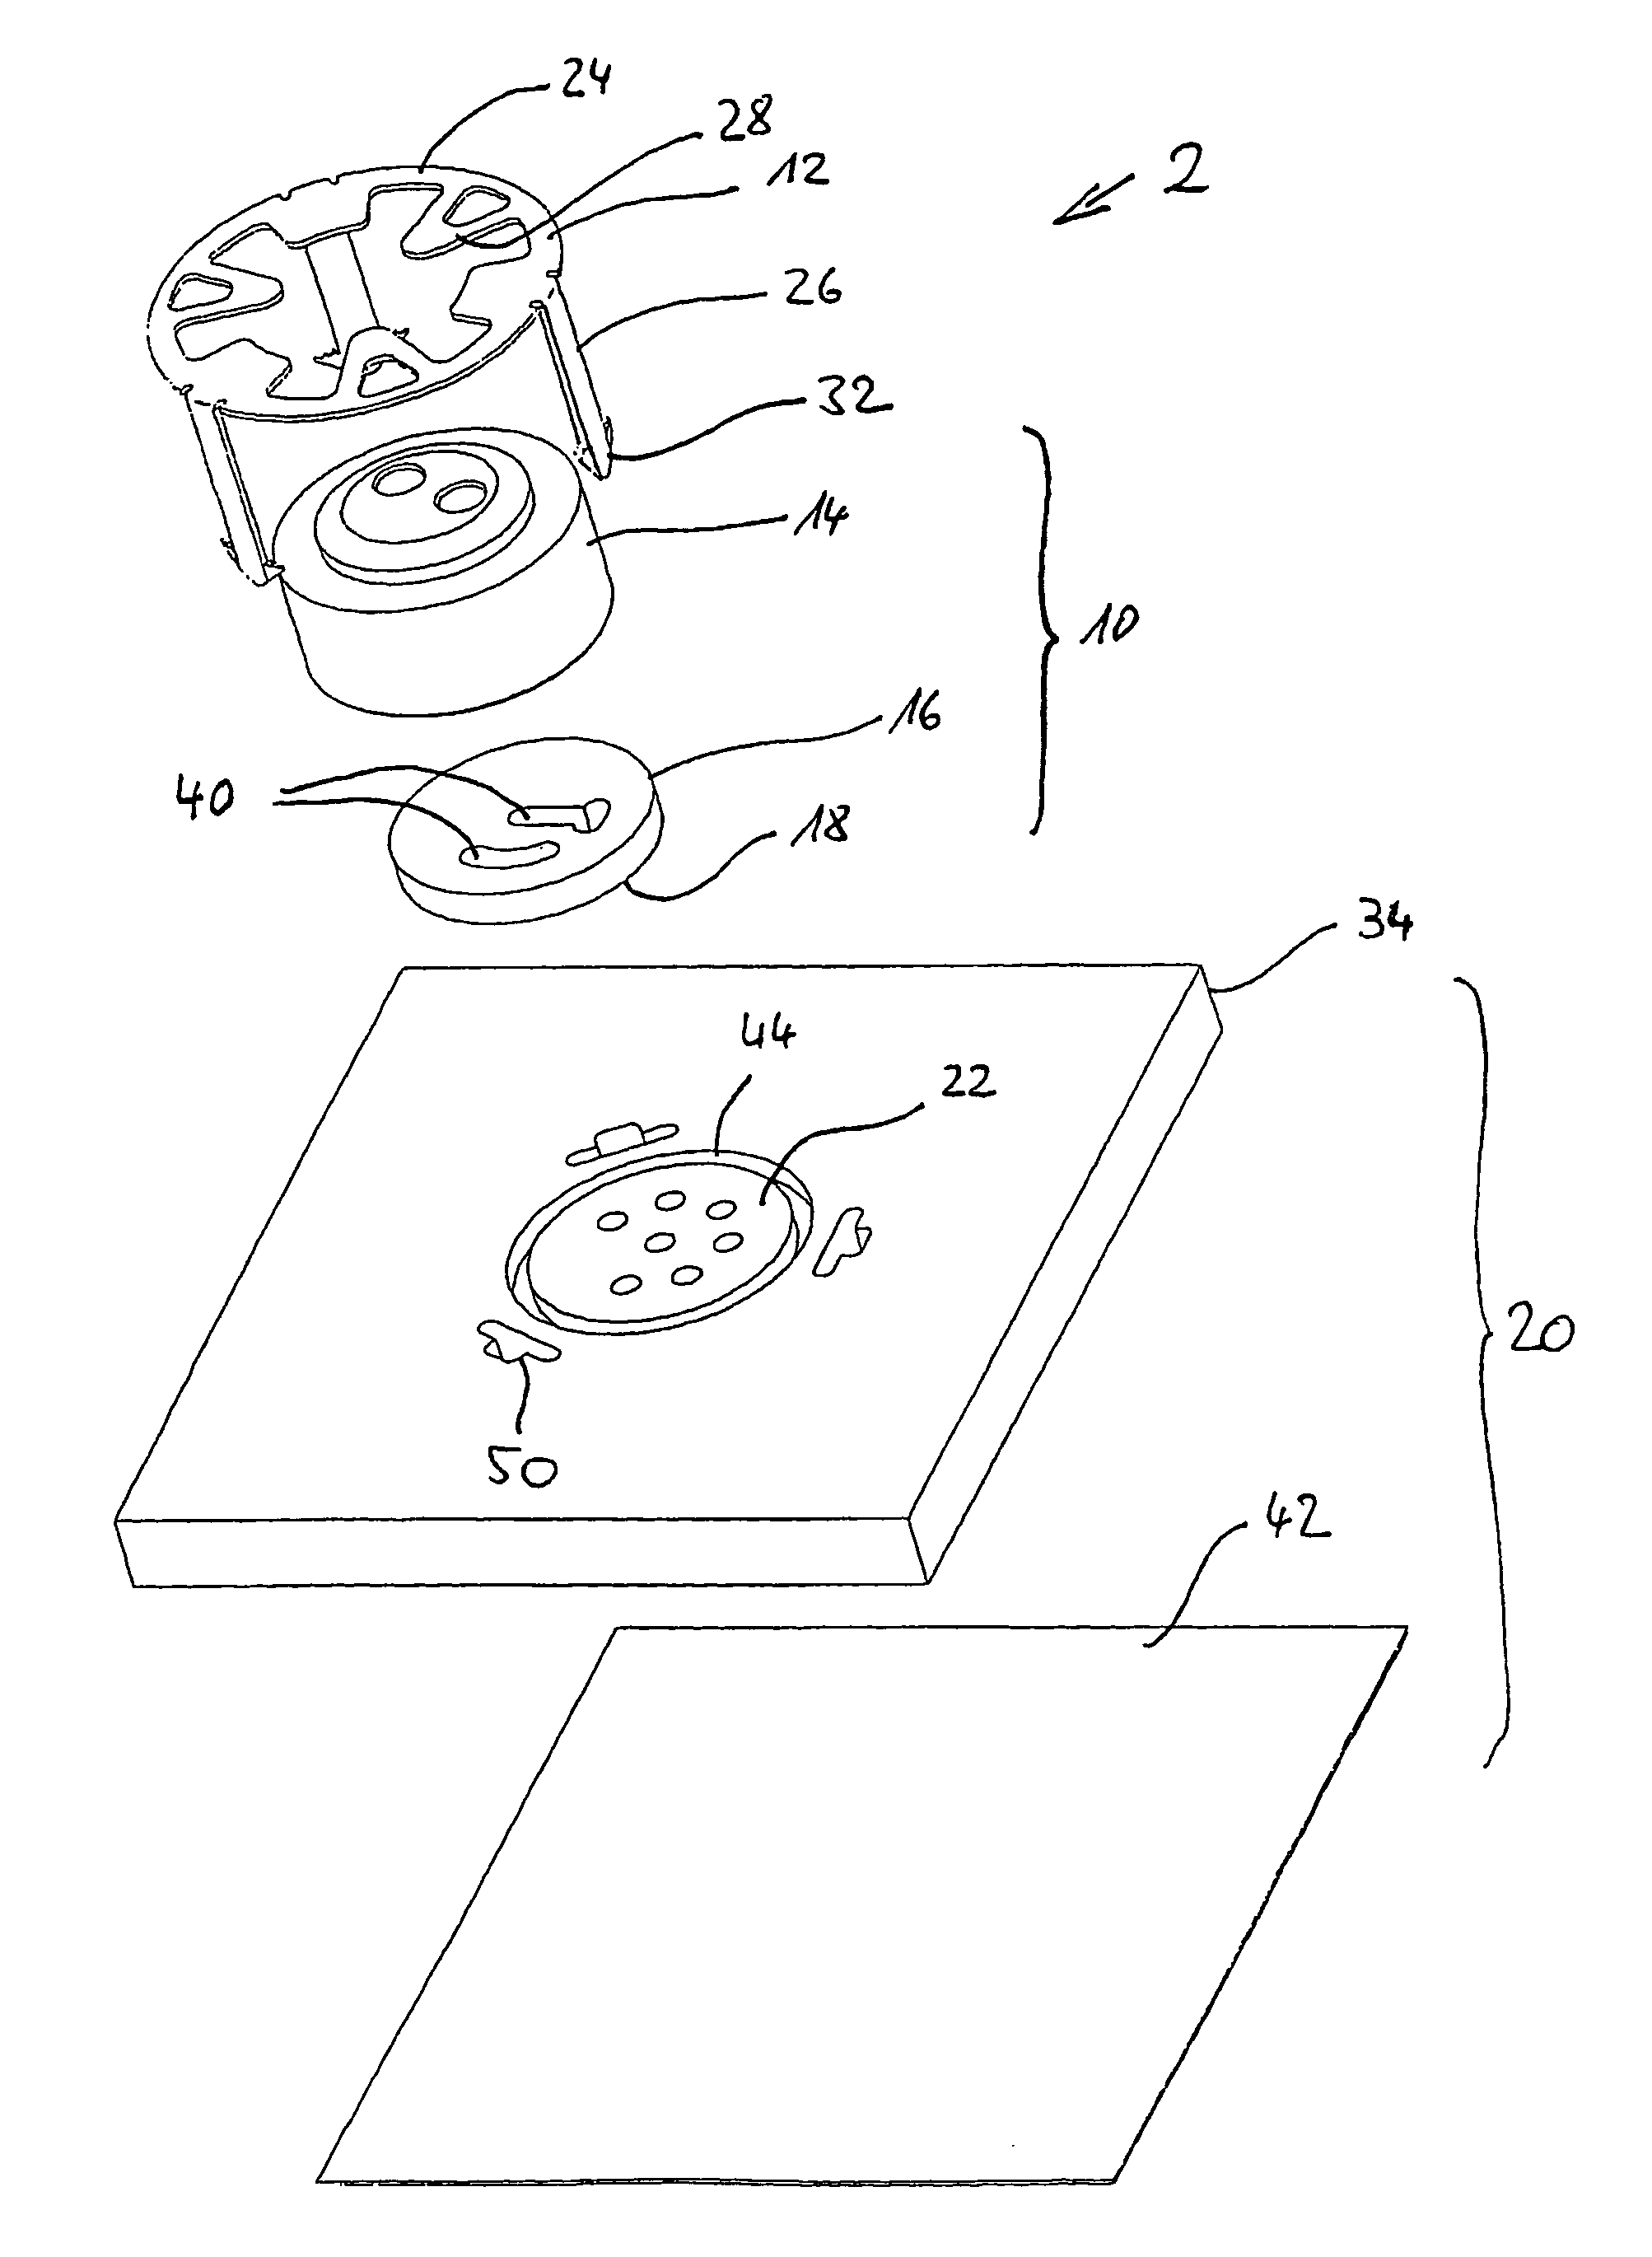 Microvalve and sealing device for use in a microfluidics system, and method for the production thereof